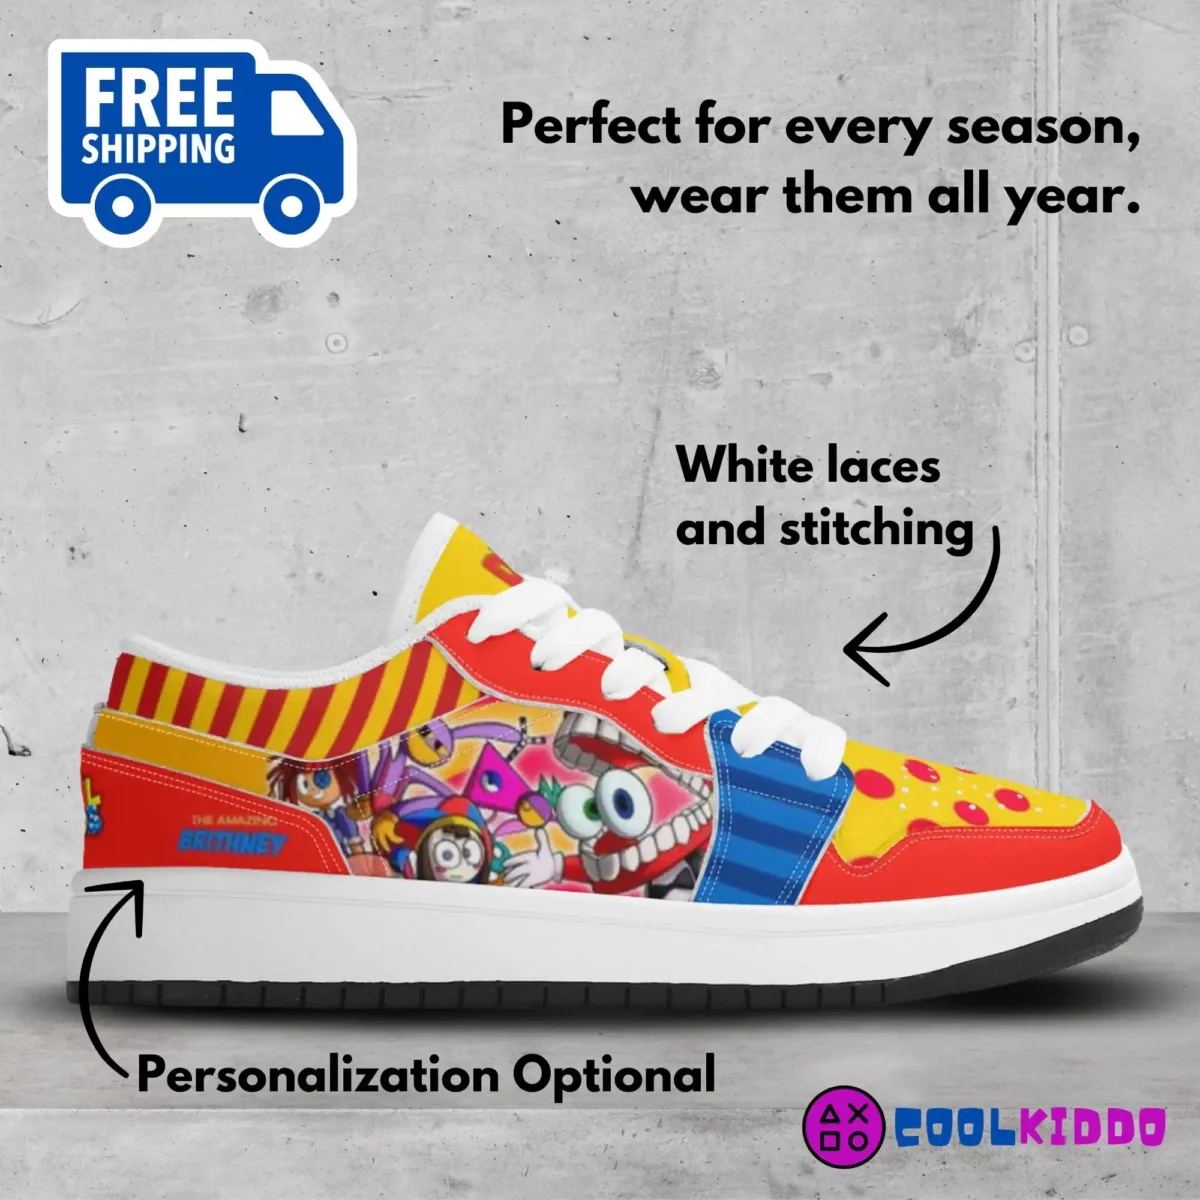 Personalized The Amazing Digital Circus Leather Low-Top Sneakers for Kids | Unisex Casual Shoes Cool Kiddo 14